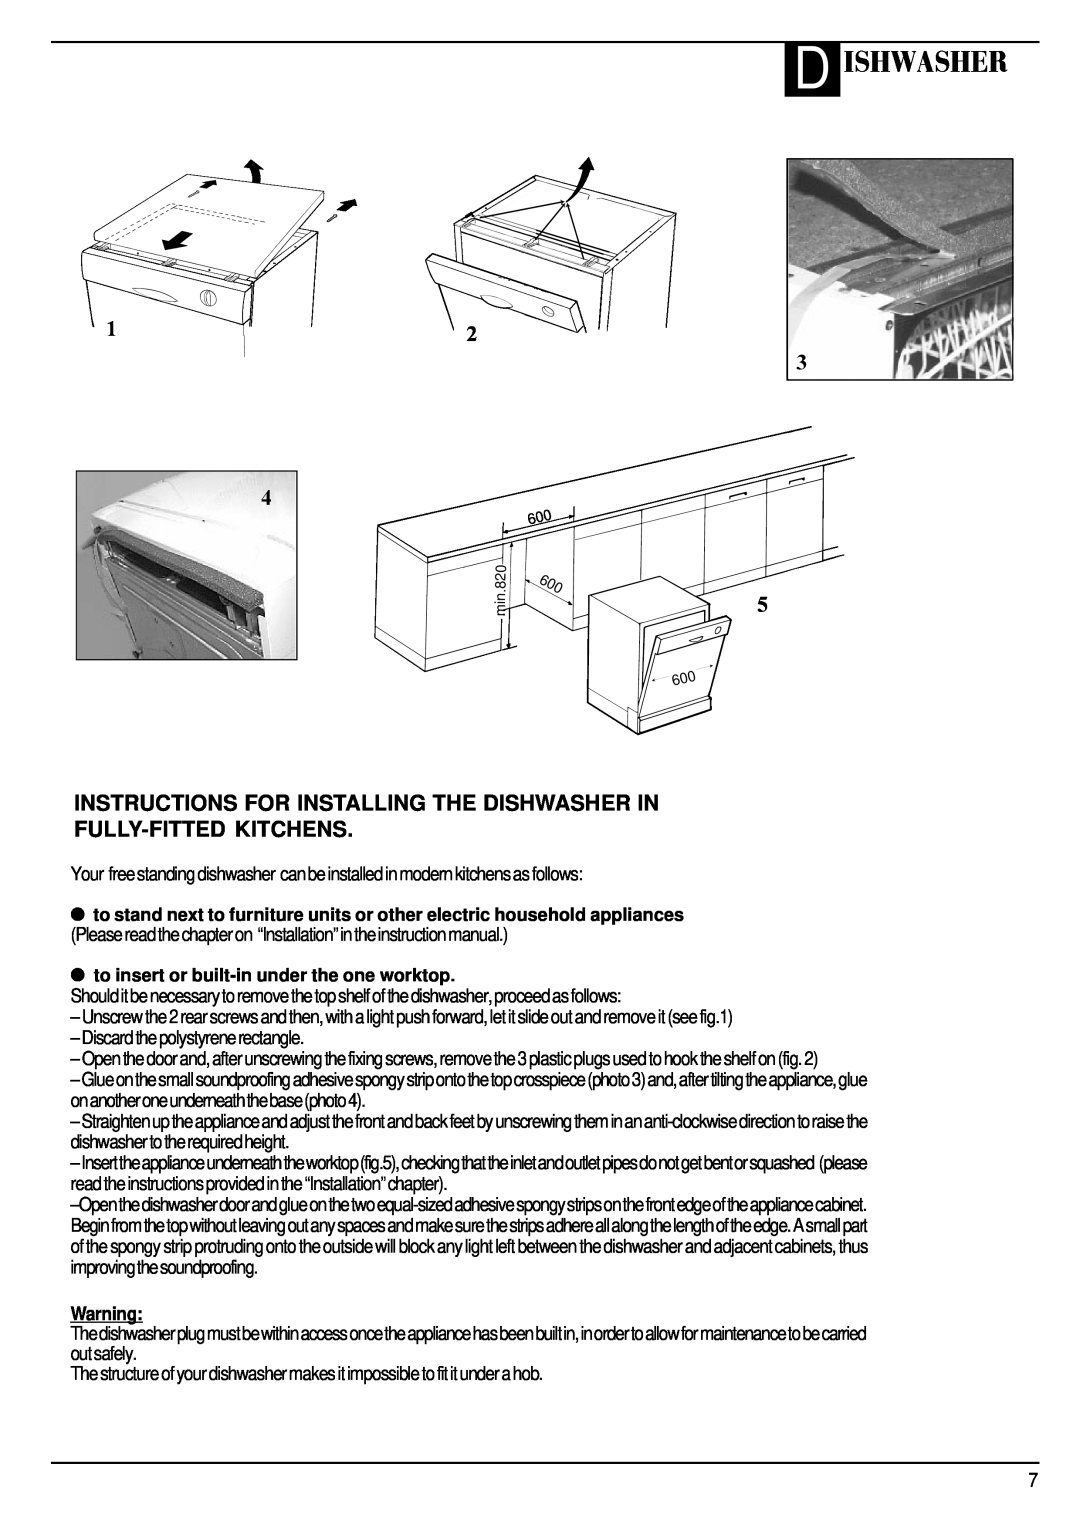 Hotpoint FDW60, FDW65 manual D Ishwasher, Instructions For Installing The Dishwasher In Fully-Fitted Kitchens 